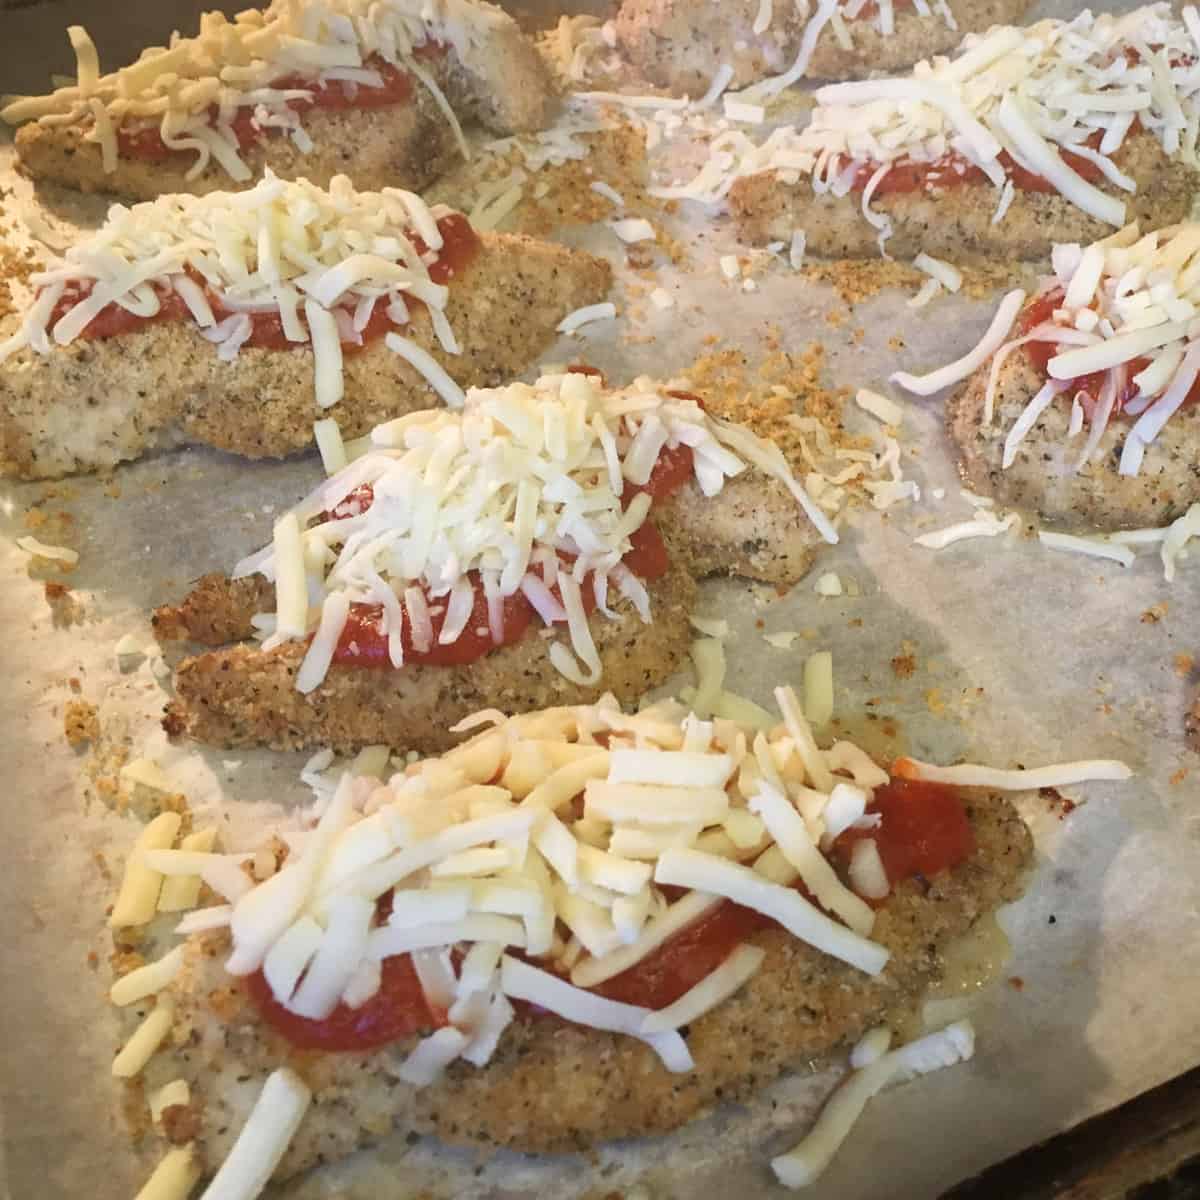 Grated mozzarella cheese and sauce topped on the chicken.